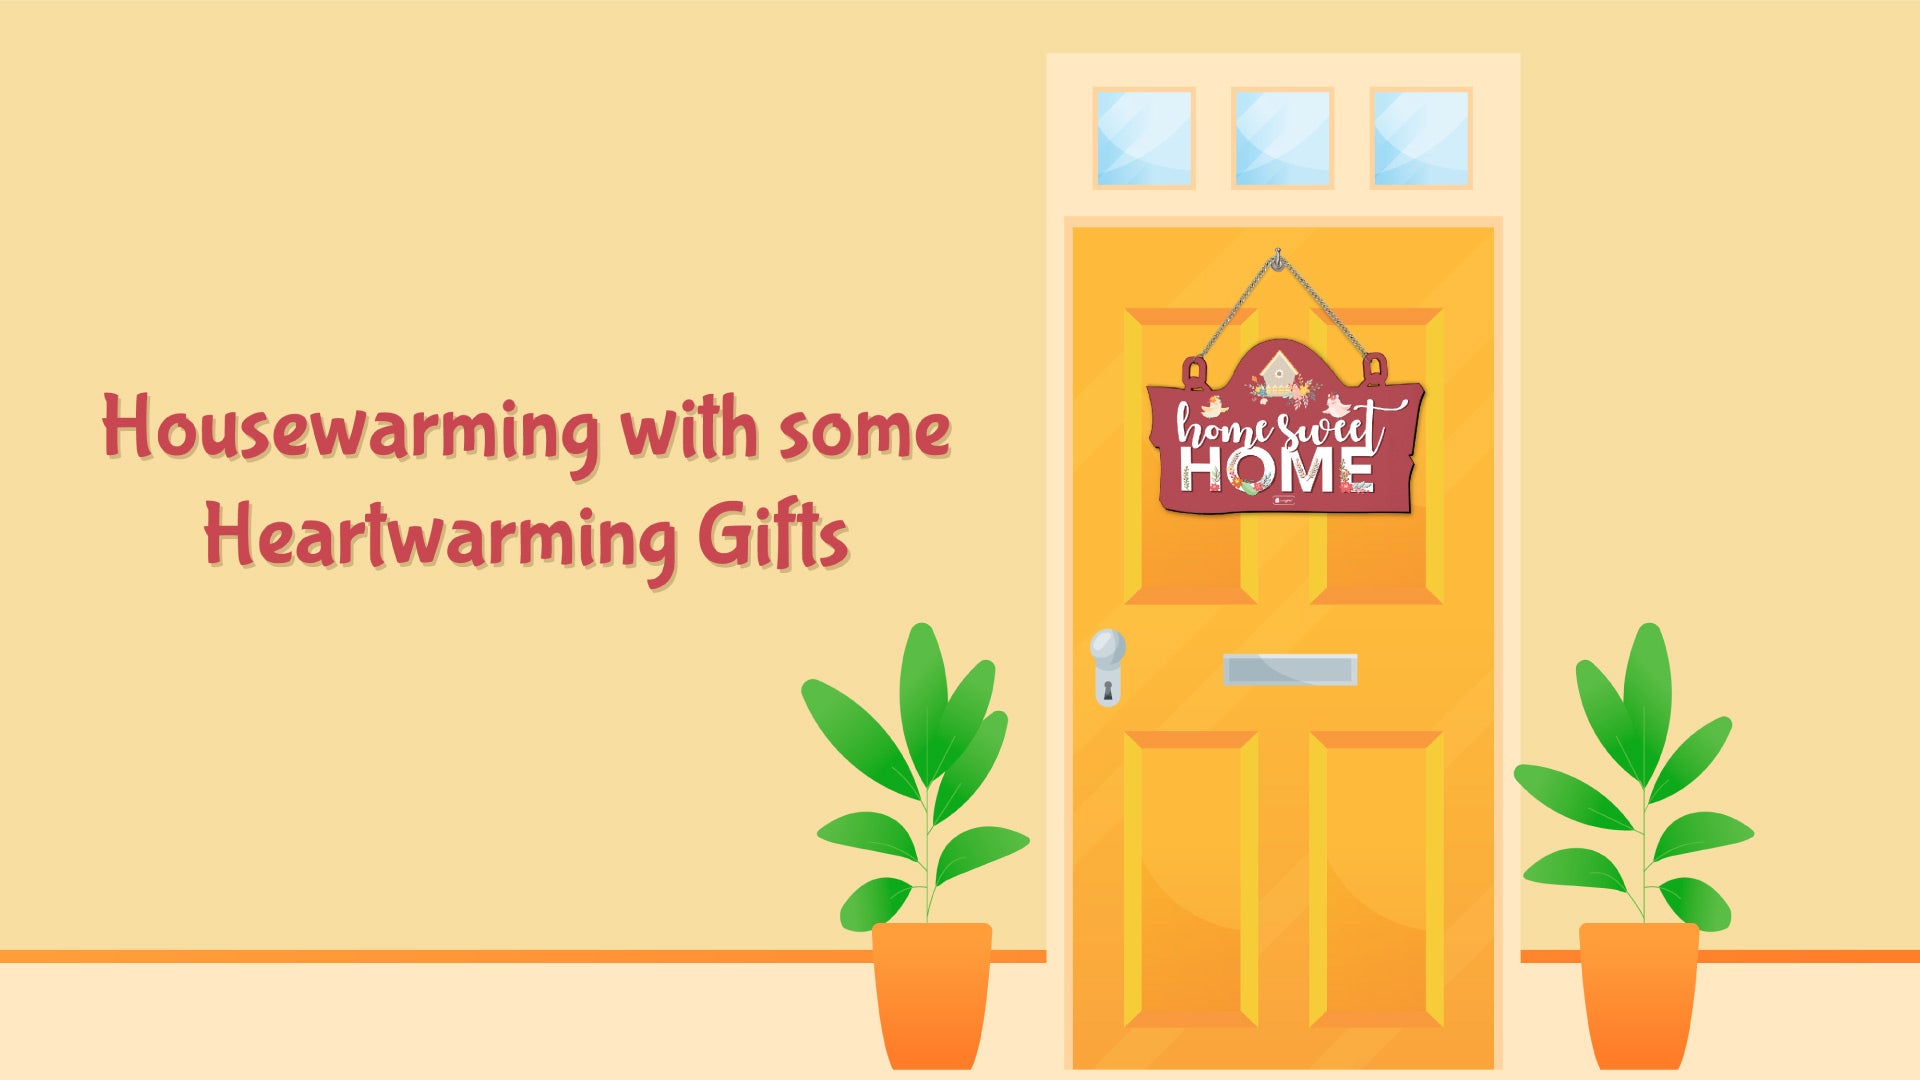 Most Popular House Warming Gift Items in India